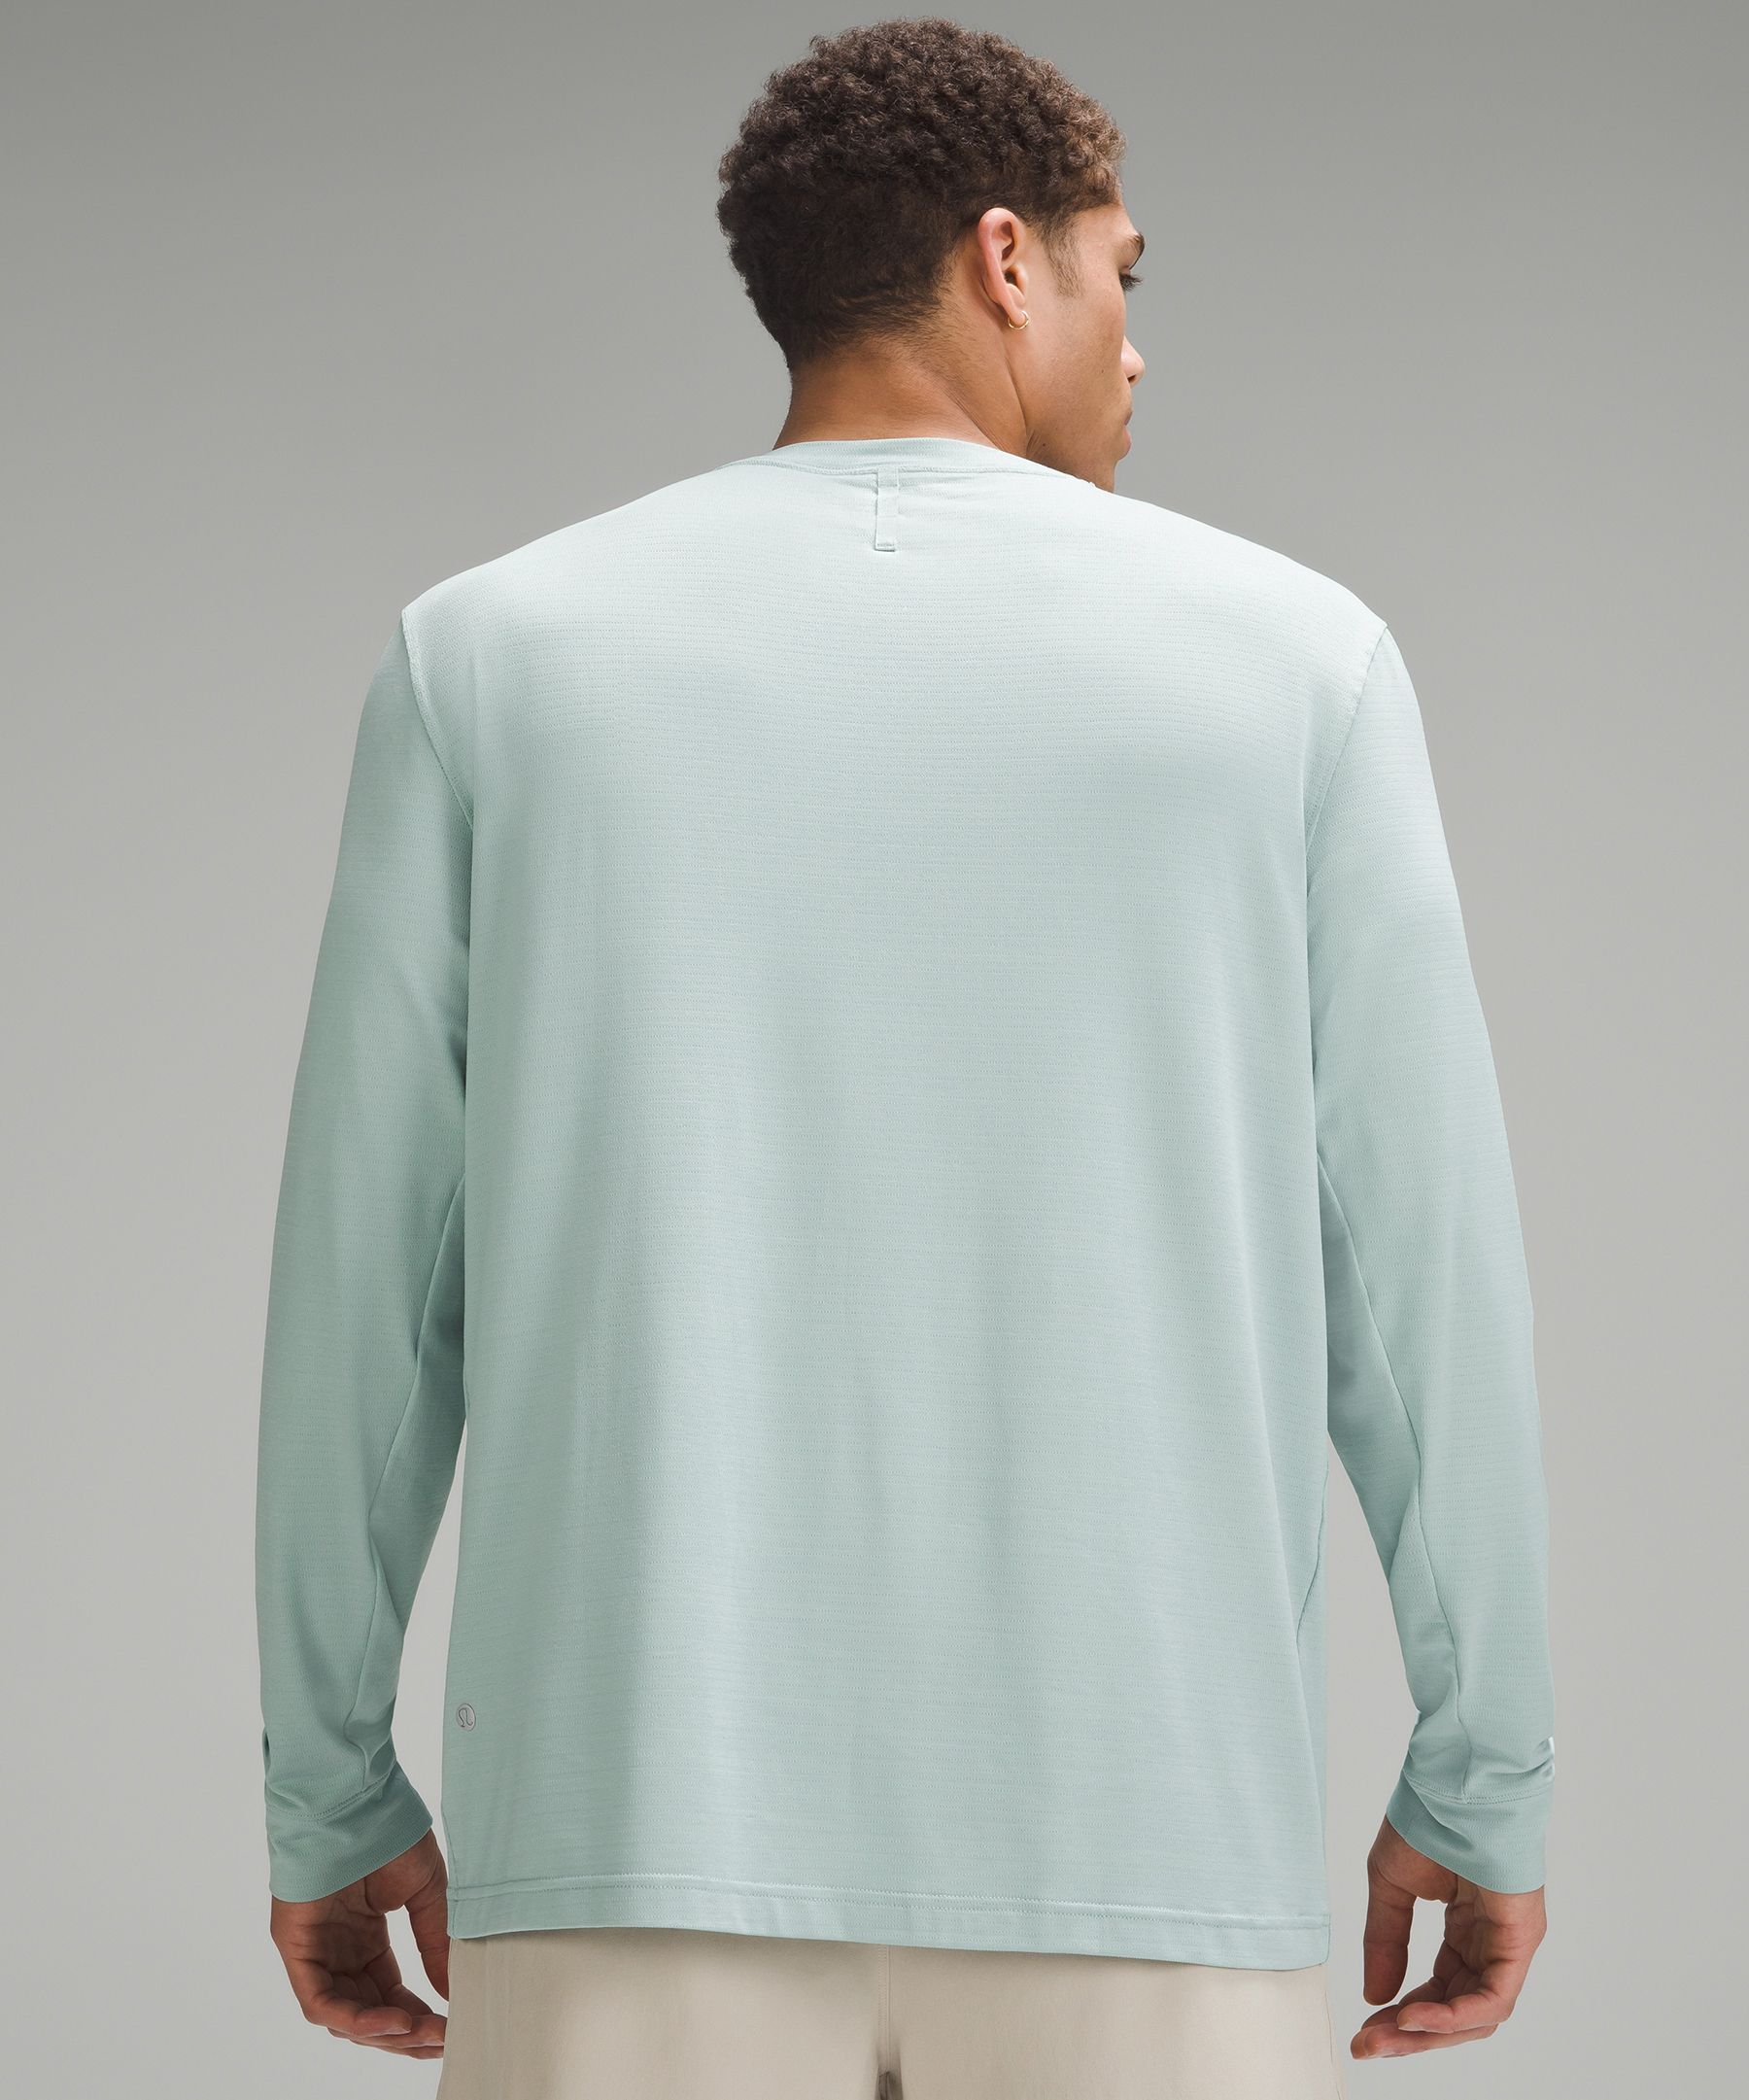 Lululemon athletica License to Train Relaxed-Fit Long-Sleeve Shirt, Men's Long  Sleeve Shirts